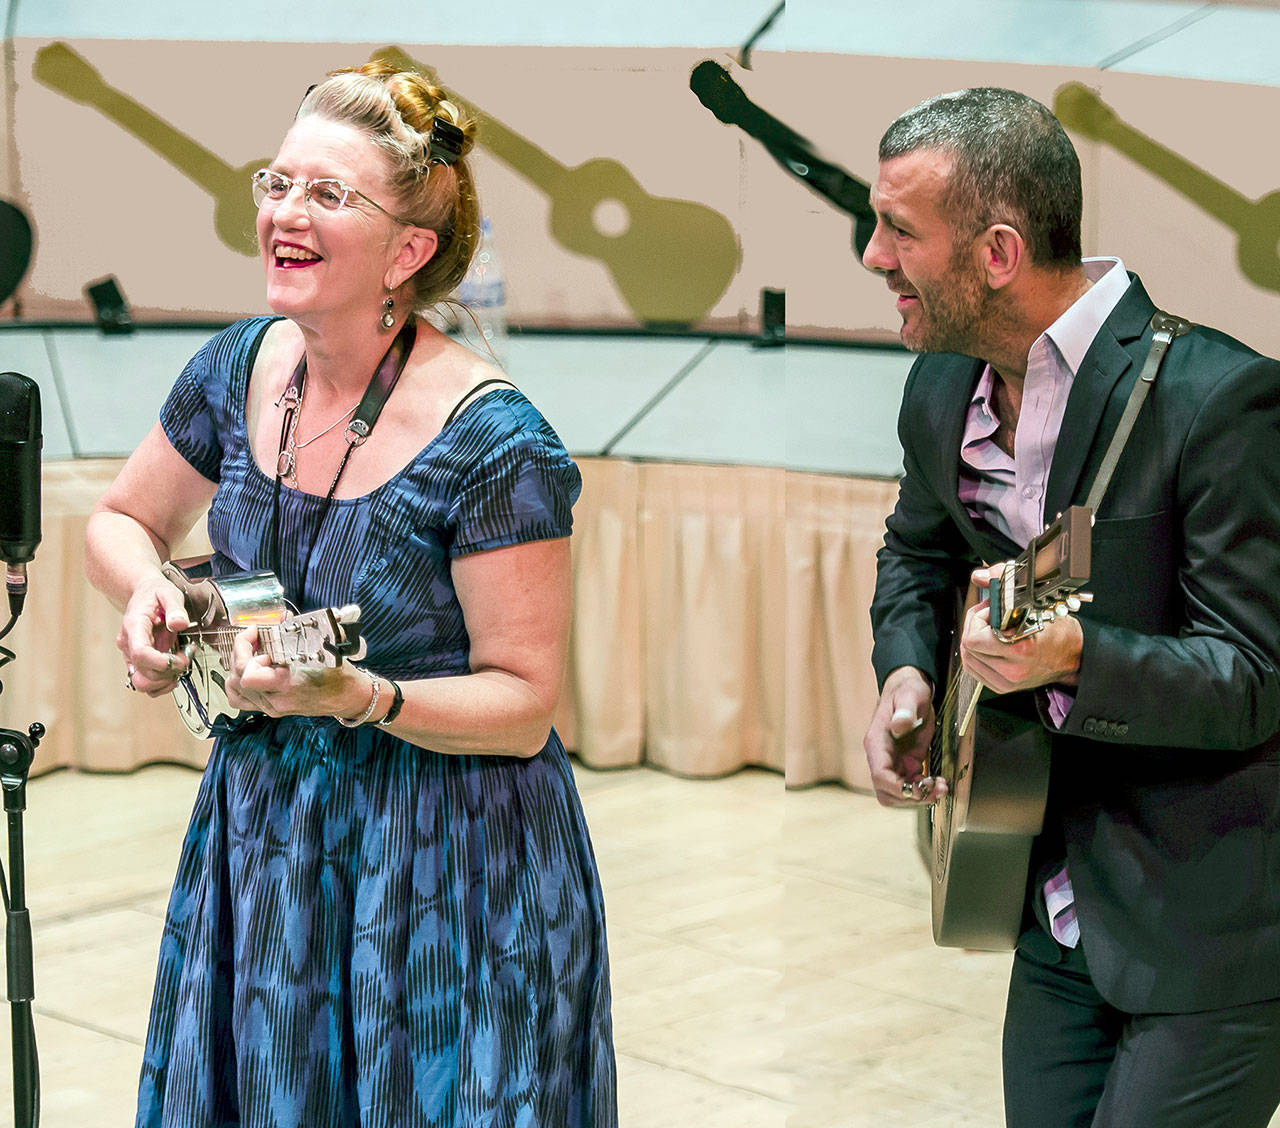 Del Rey of Seattle and Adam Franklin of England will get together for old jazz and blues tunes this Friday during the final Port Townsend Ukulele Festival concert.